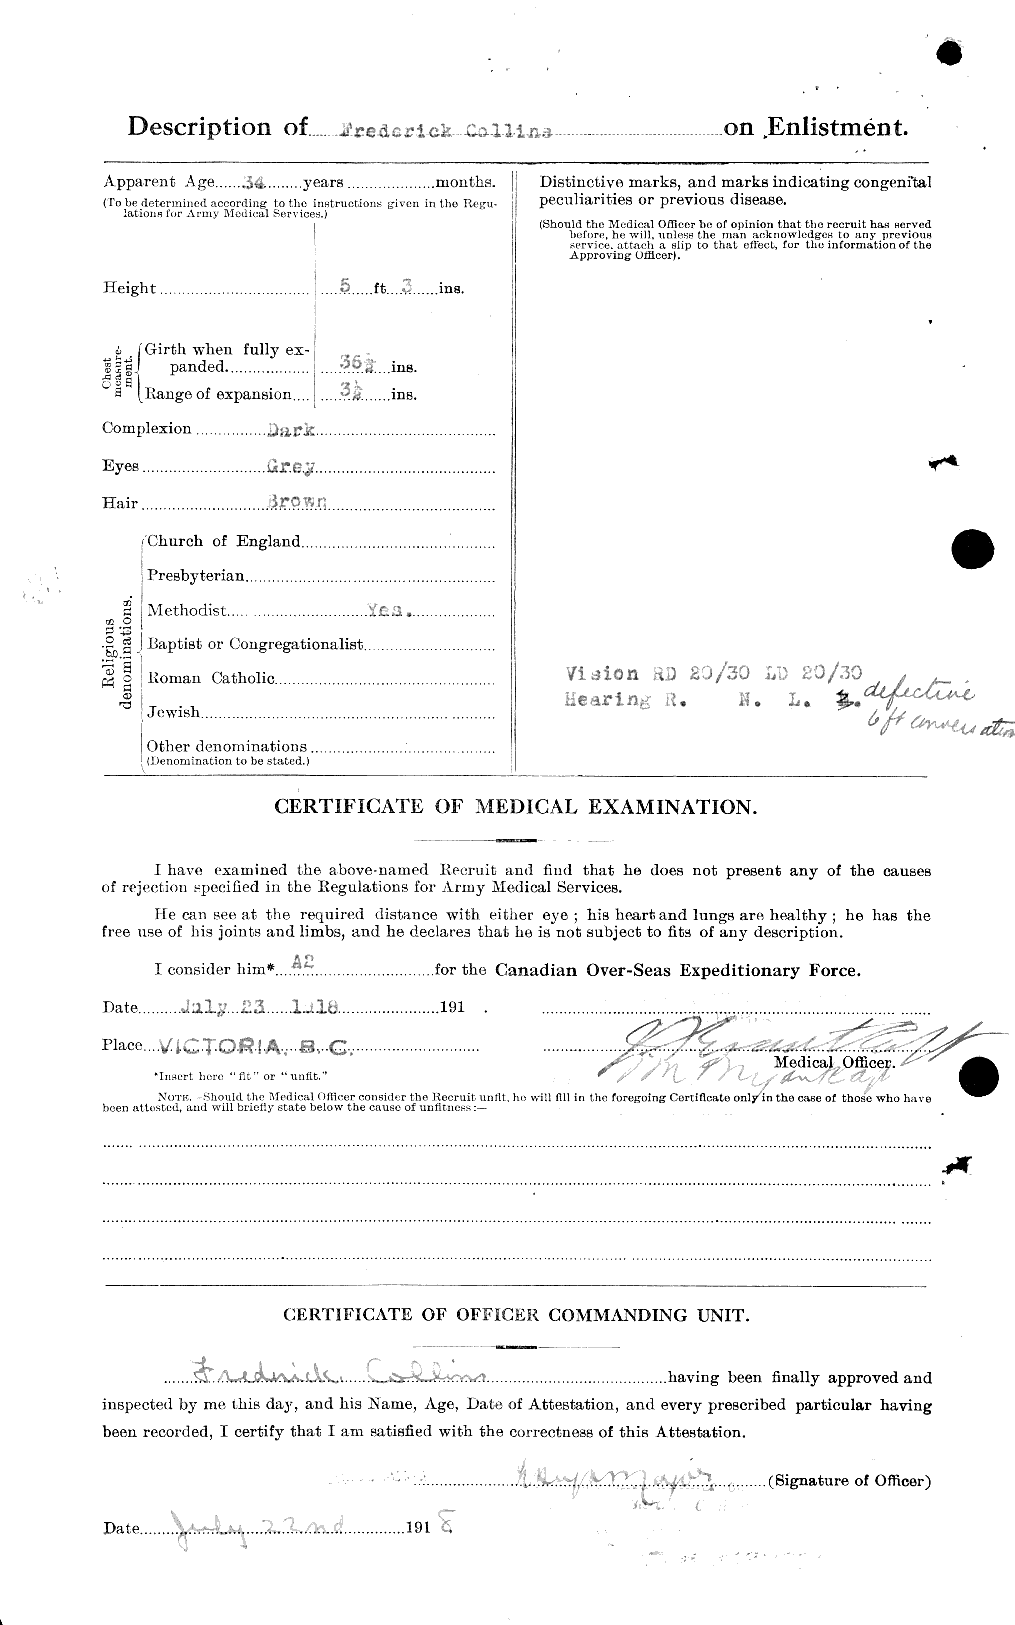 Personnel Records of the First World War - CEF 037828b